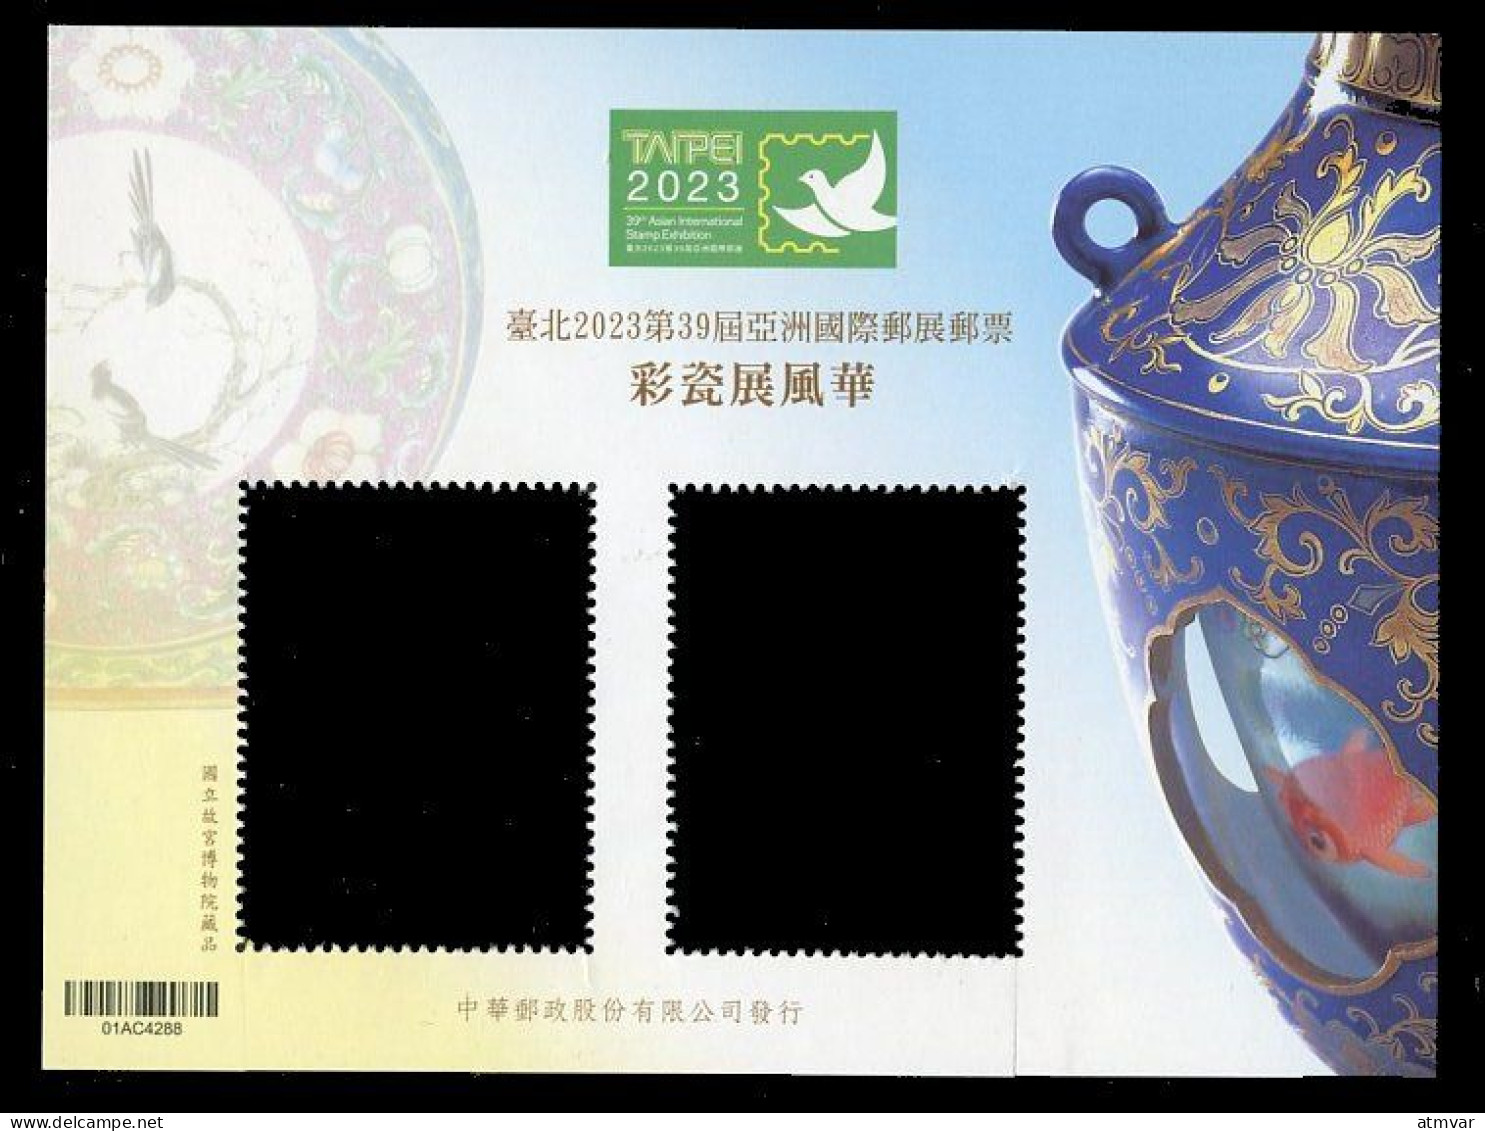 TAIWAN (2023) Cartes Maximum Cards - Taipei 2023 39th Asian Stamp Exhibition, Artistic Vases, Porcelain, Qing Dynasty - Porcellana